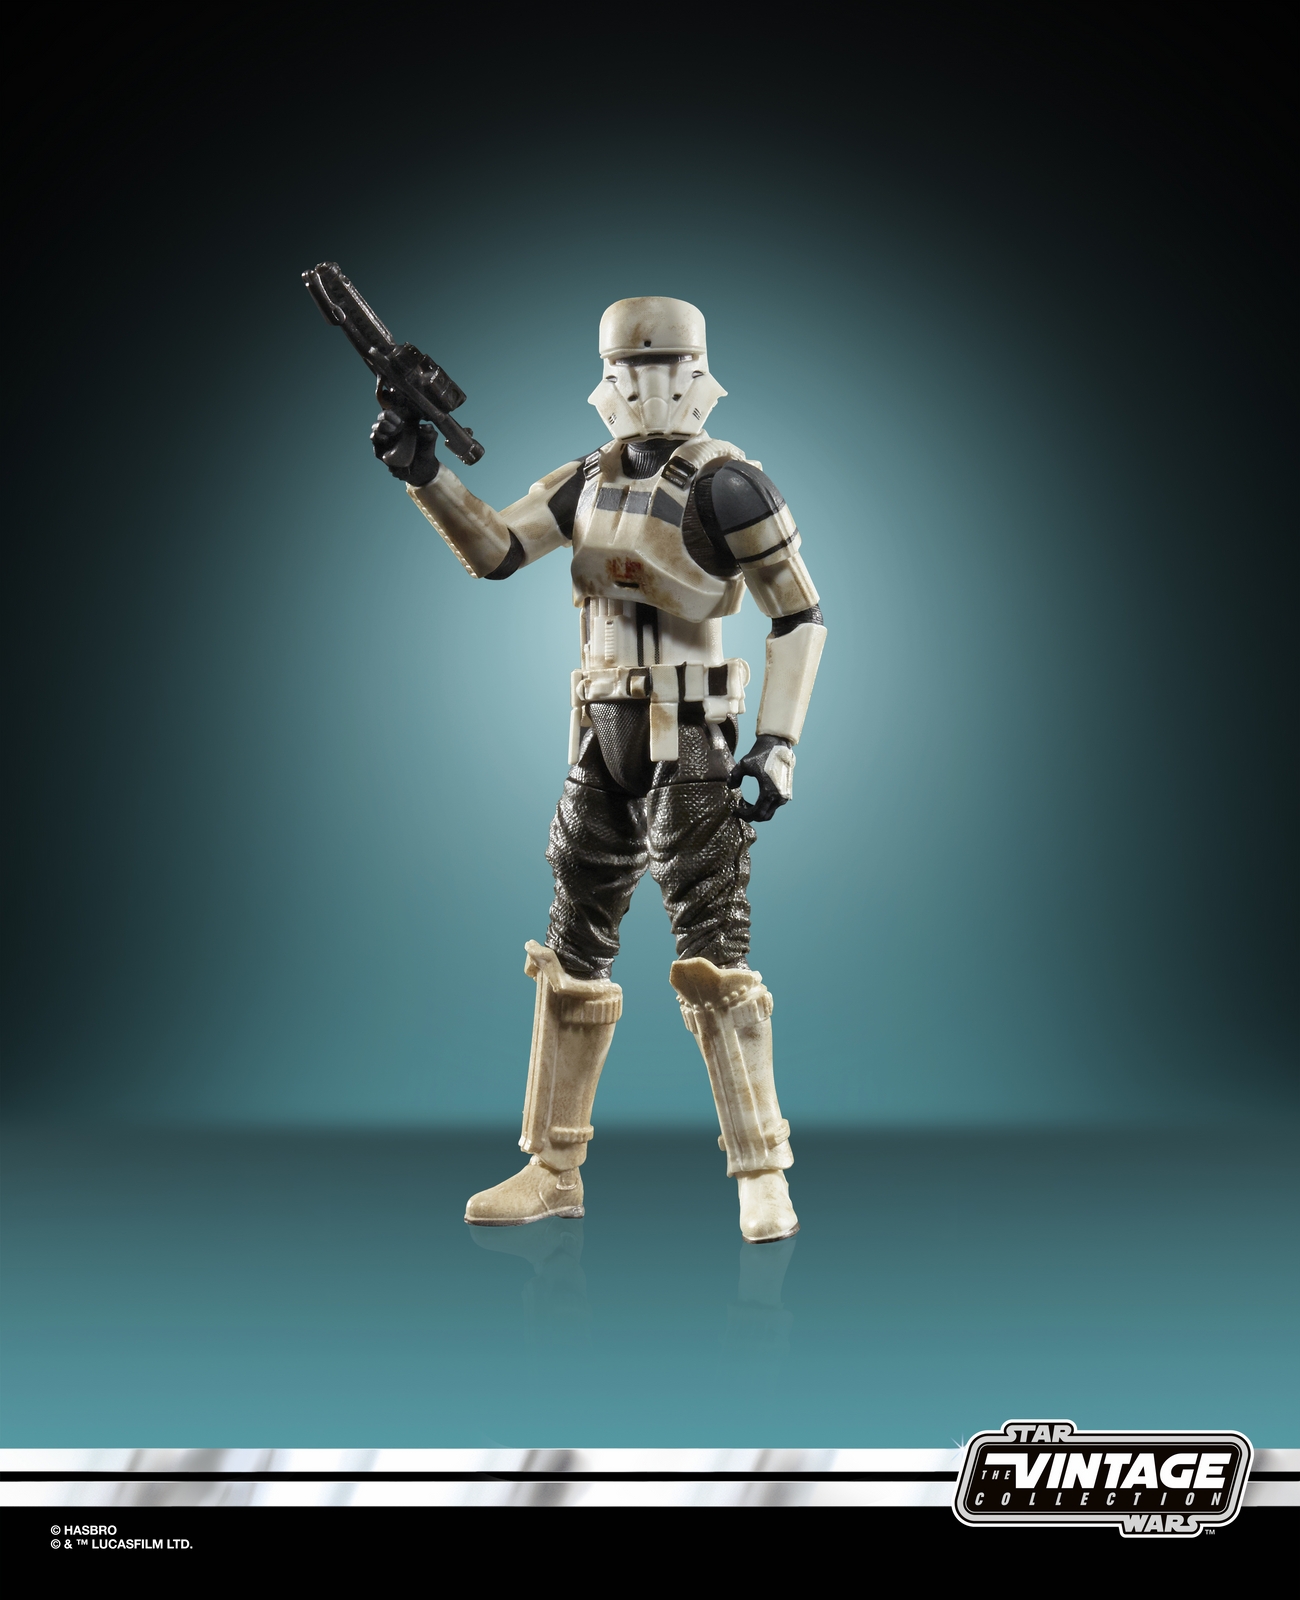 STAR WARS THE VINTAGE COLLECTION 3.75-INCH Figure Assortment - Imperial Assault Tank Commander (oop 1).jpg